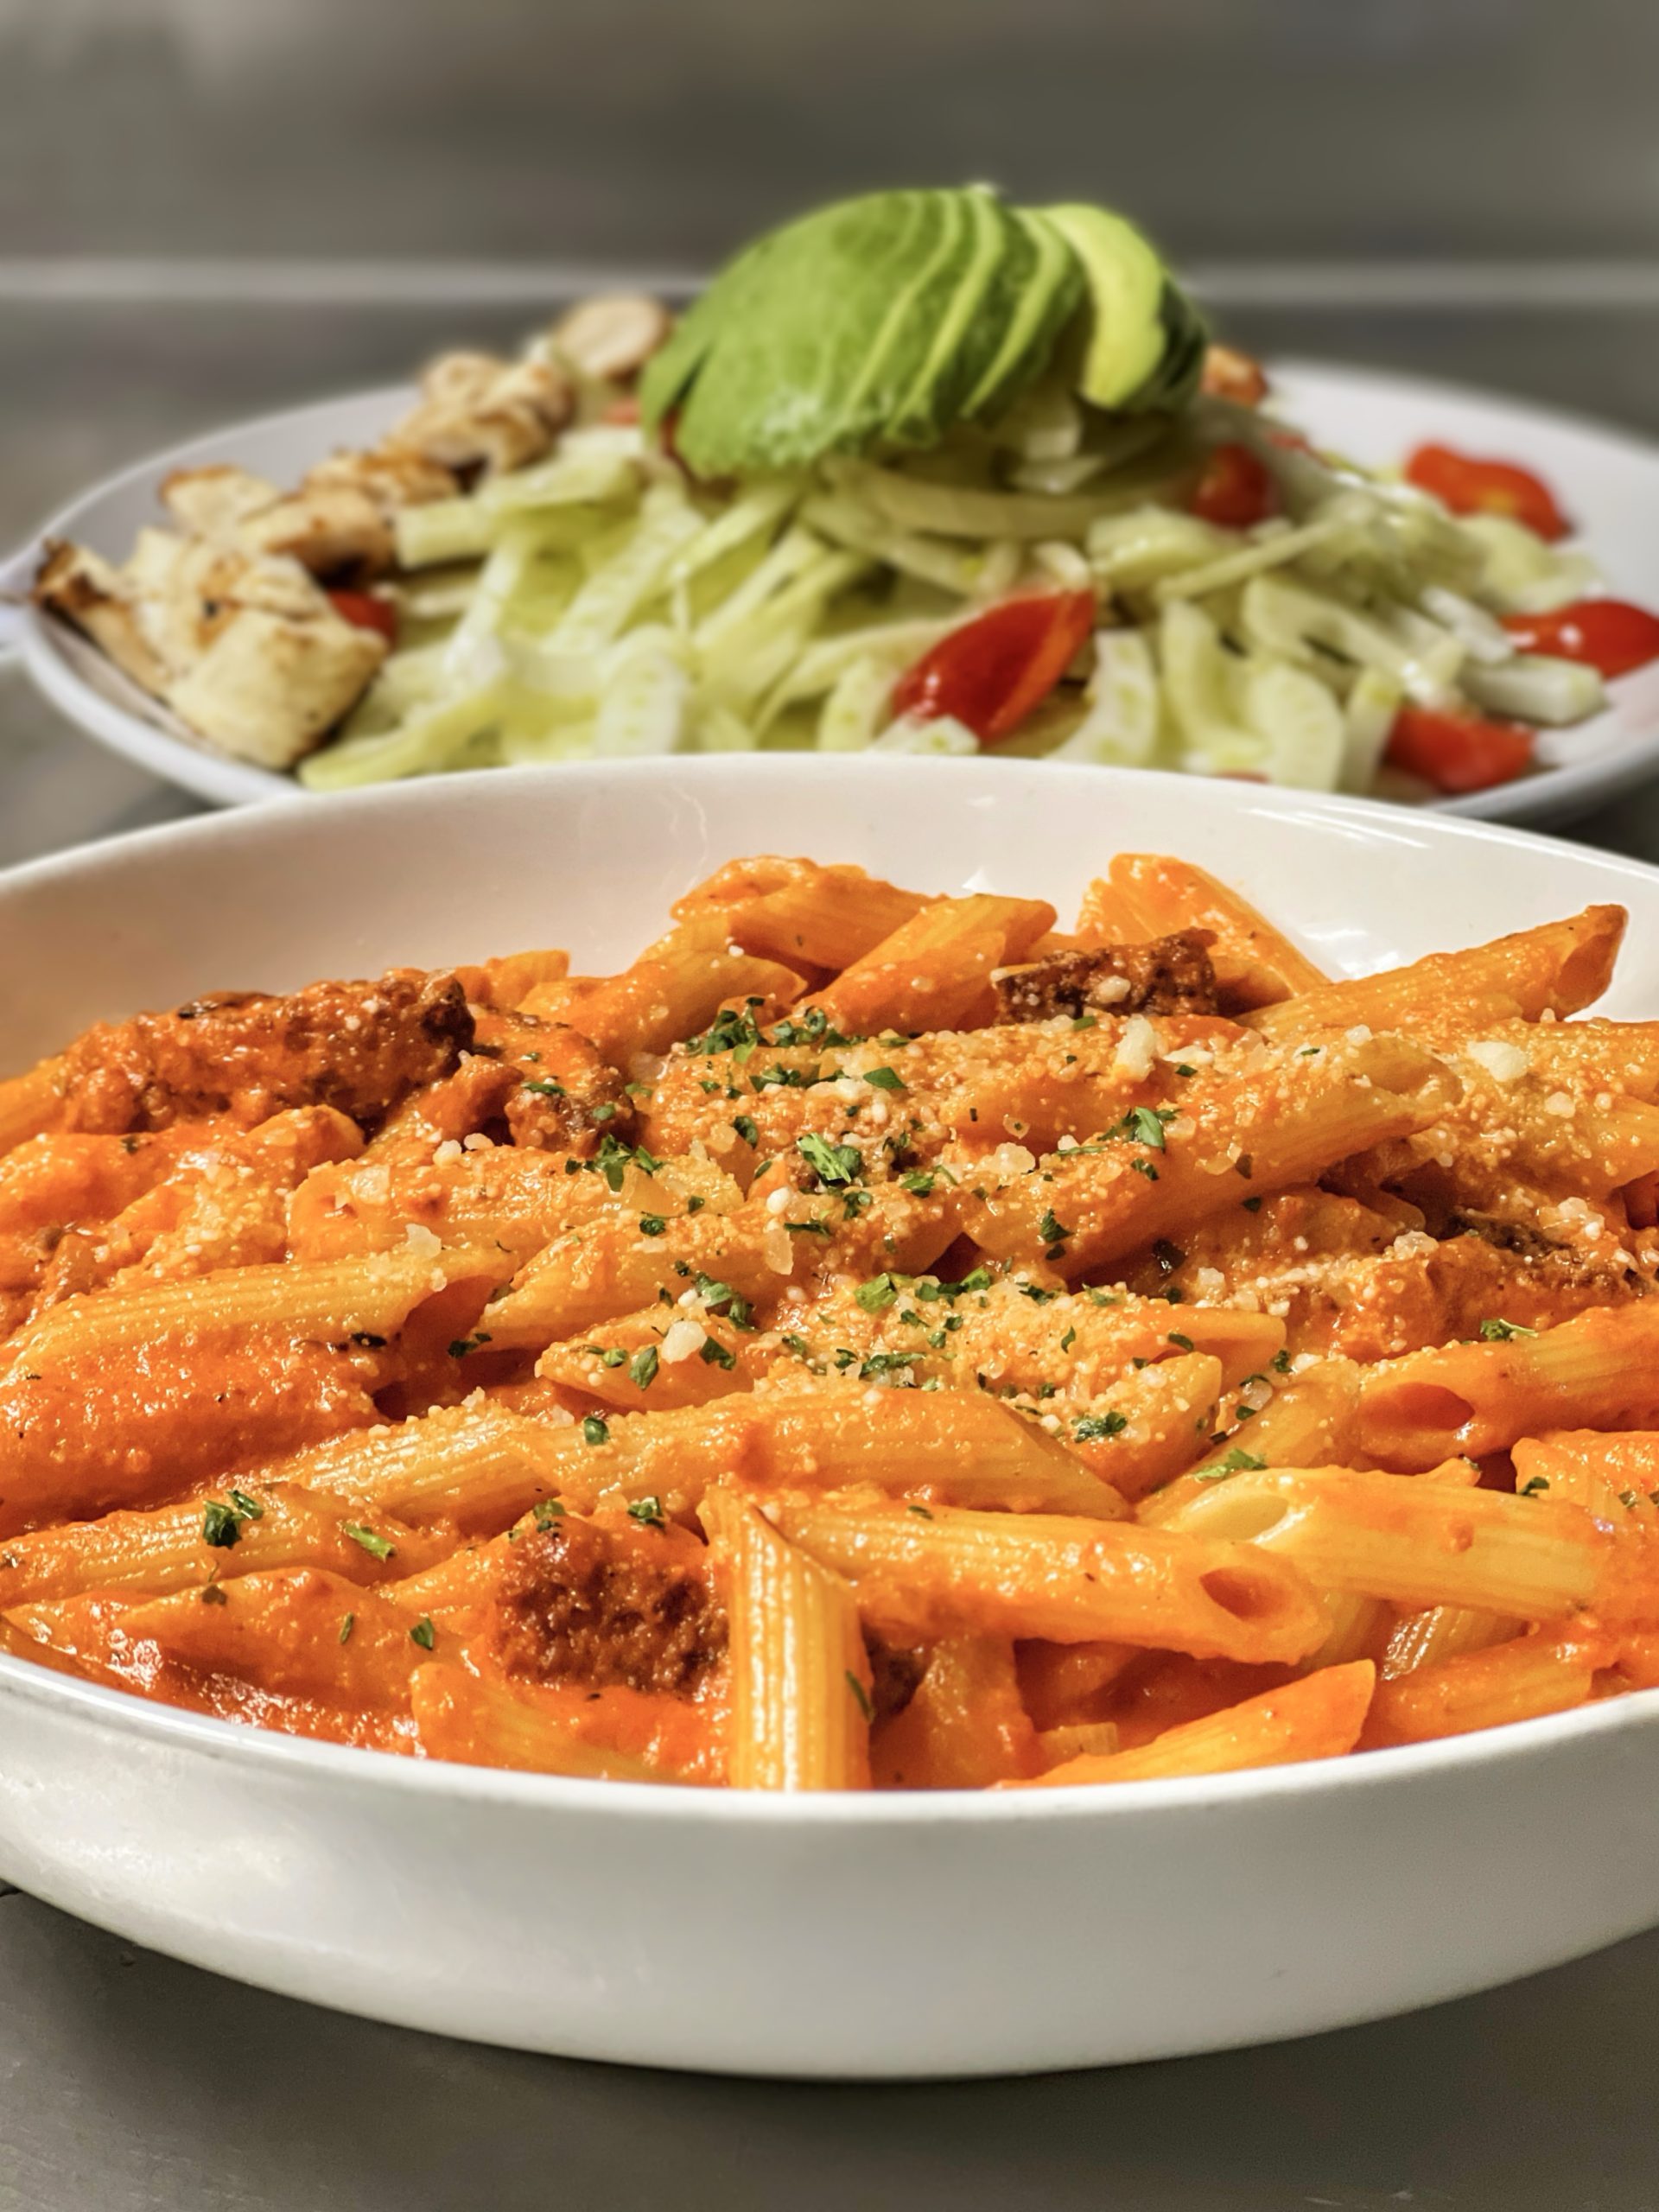 Penne pasta with vodka sauce in focus and grilled chicken cobb salad out of focus